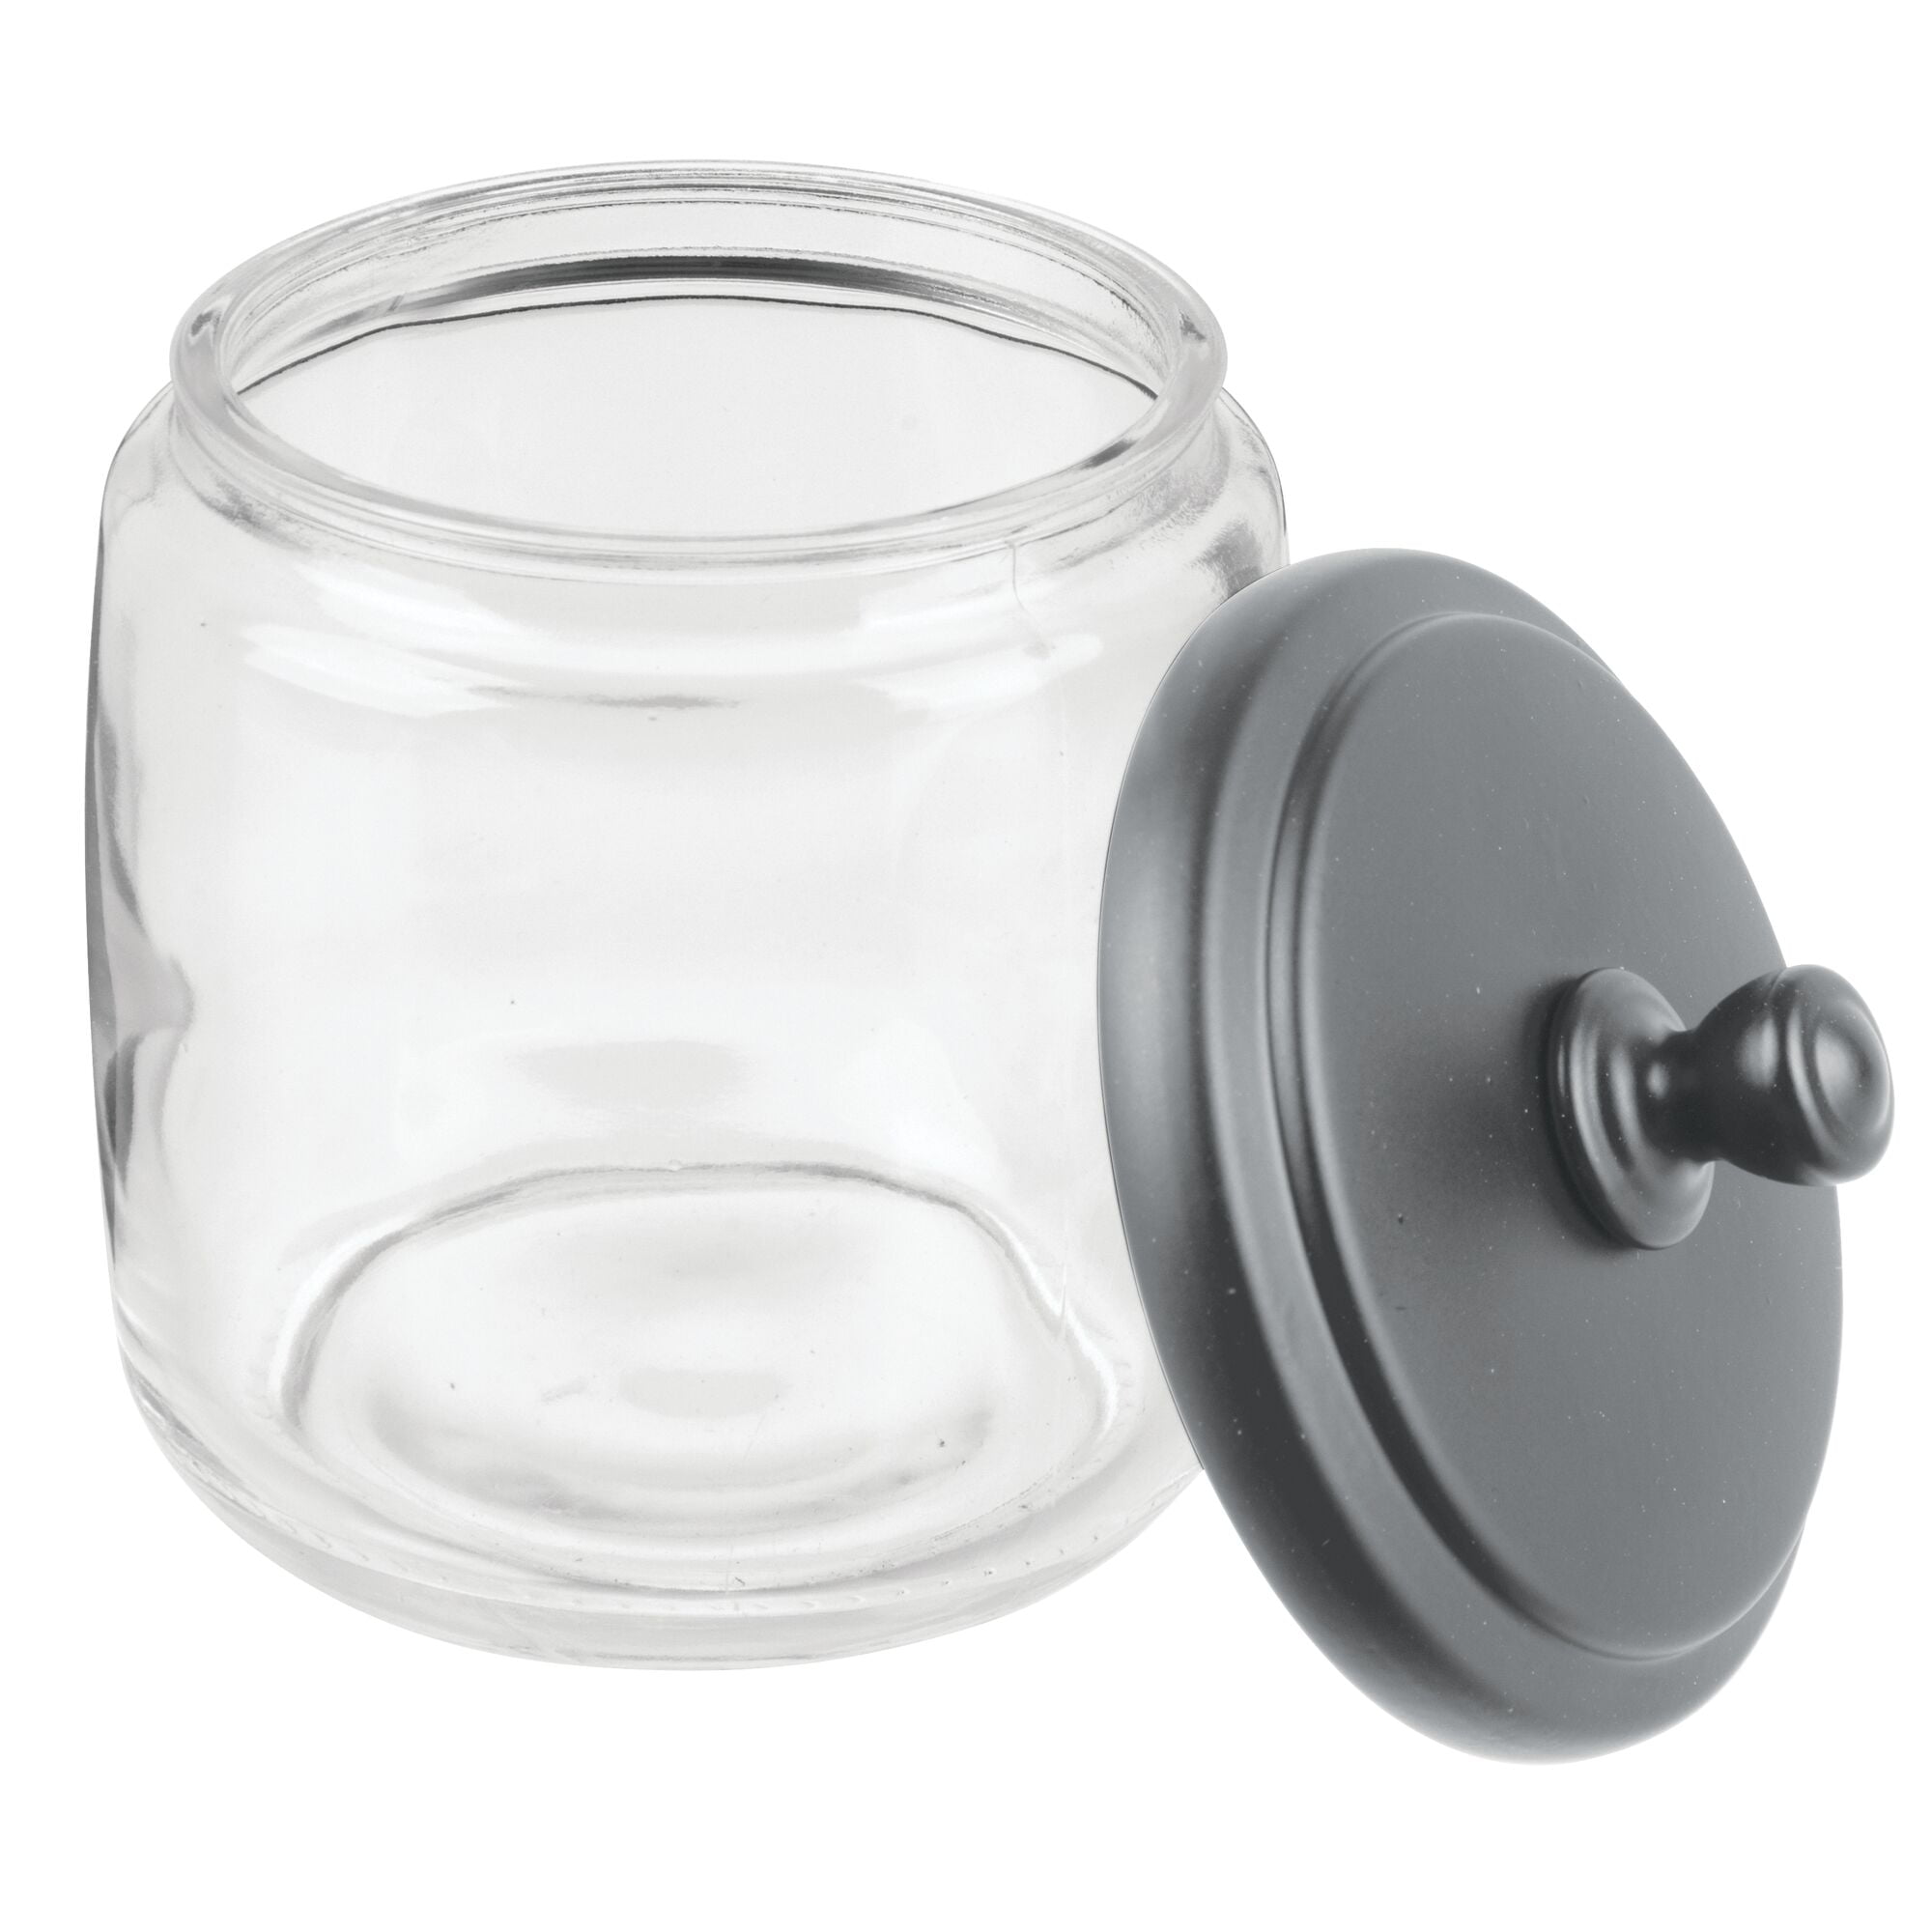 clear glass jar with metal cladding lid large - Ellementry